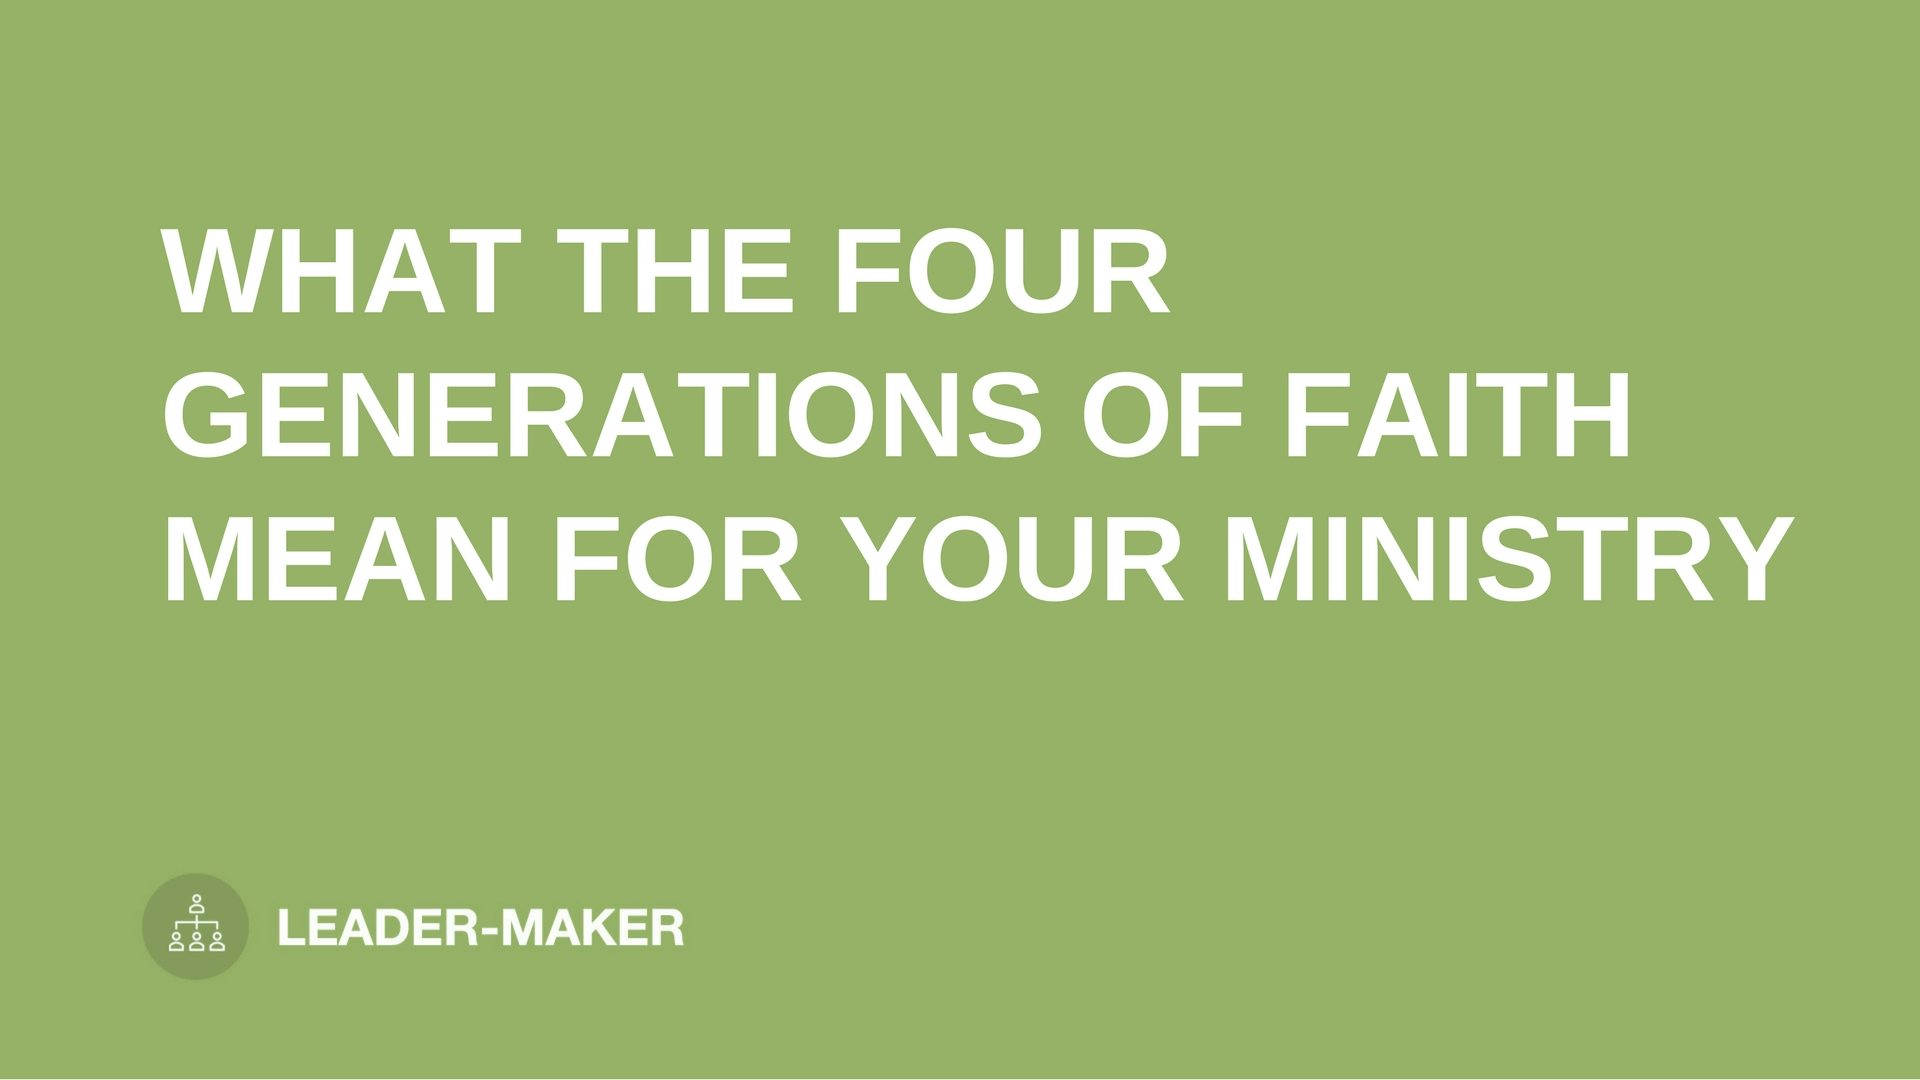 text "FOUR GENERATIONS OF FAITH FOR MINISTRY" on green background leaders.church